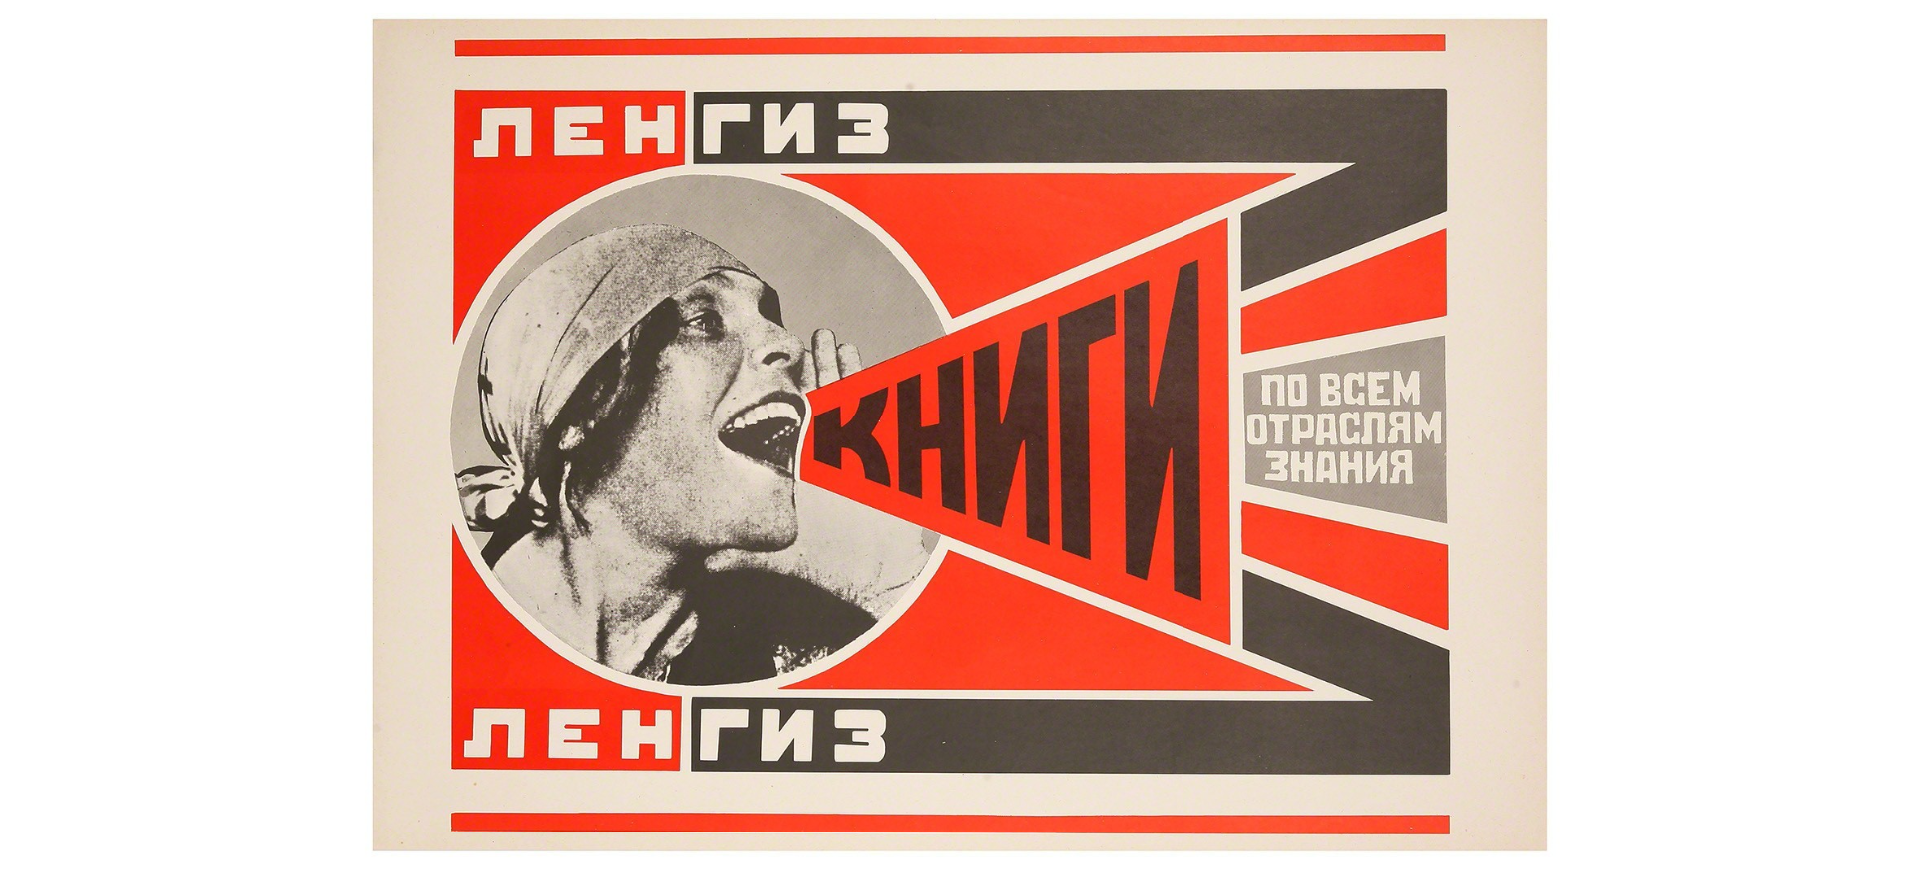 Alexander Rodchenko, Livres (S’il vous plaît)! In All Branches of Knowledge, affiche, 1924